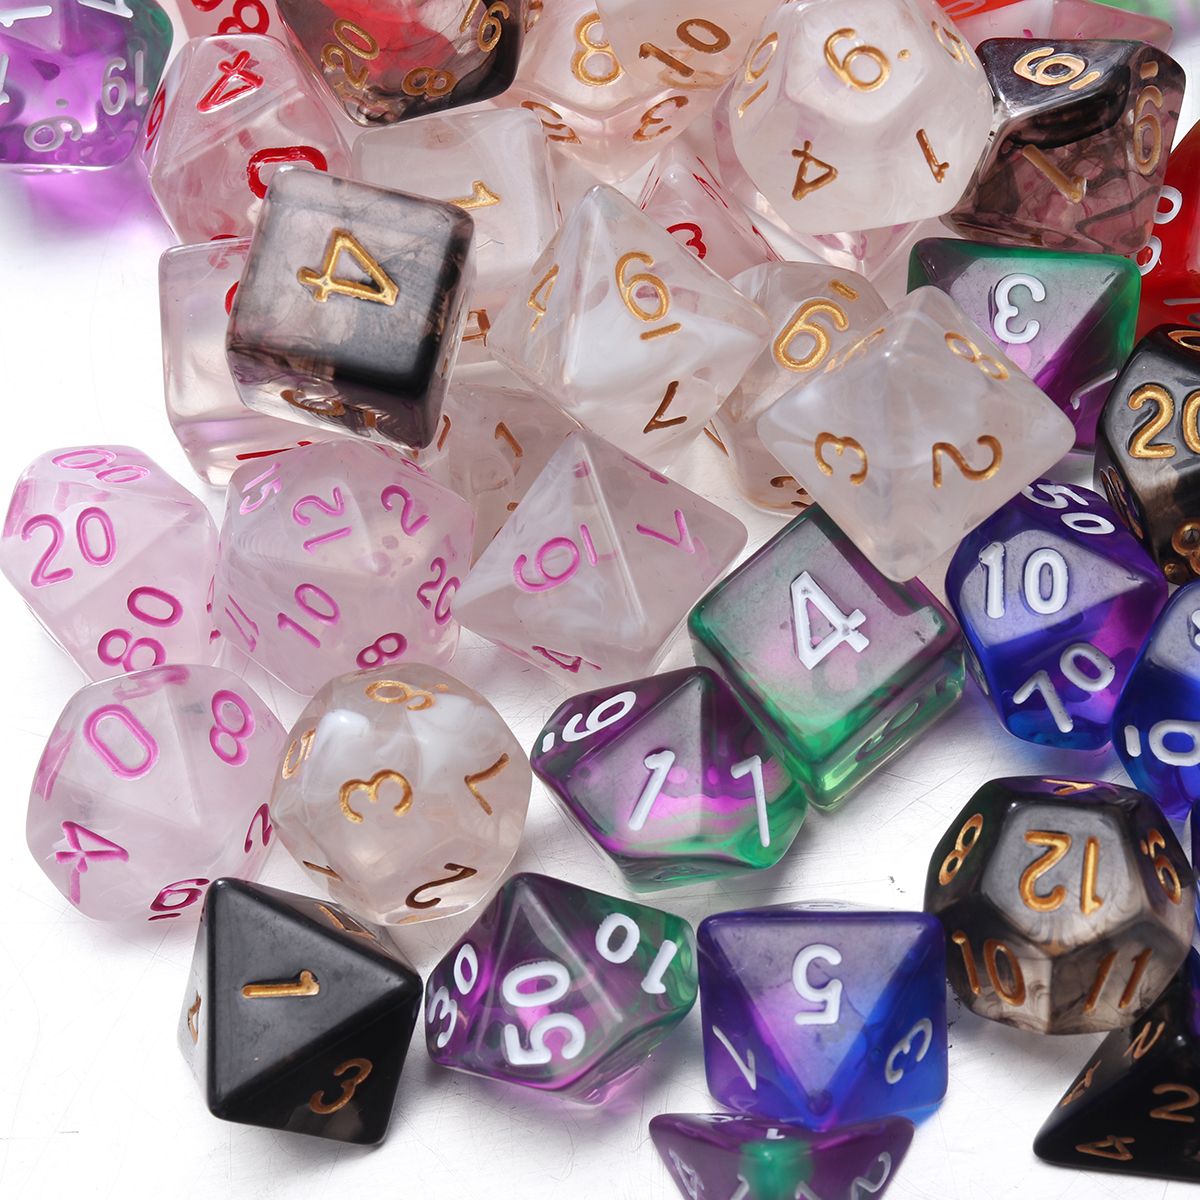 7pcs-Set-Embossed-Polyhedral-Dices-DND-RPG-MTG-Role-Playing-Board-Game-Dices-Set-1627969